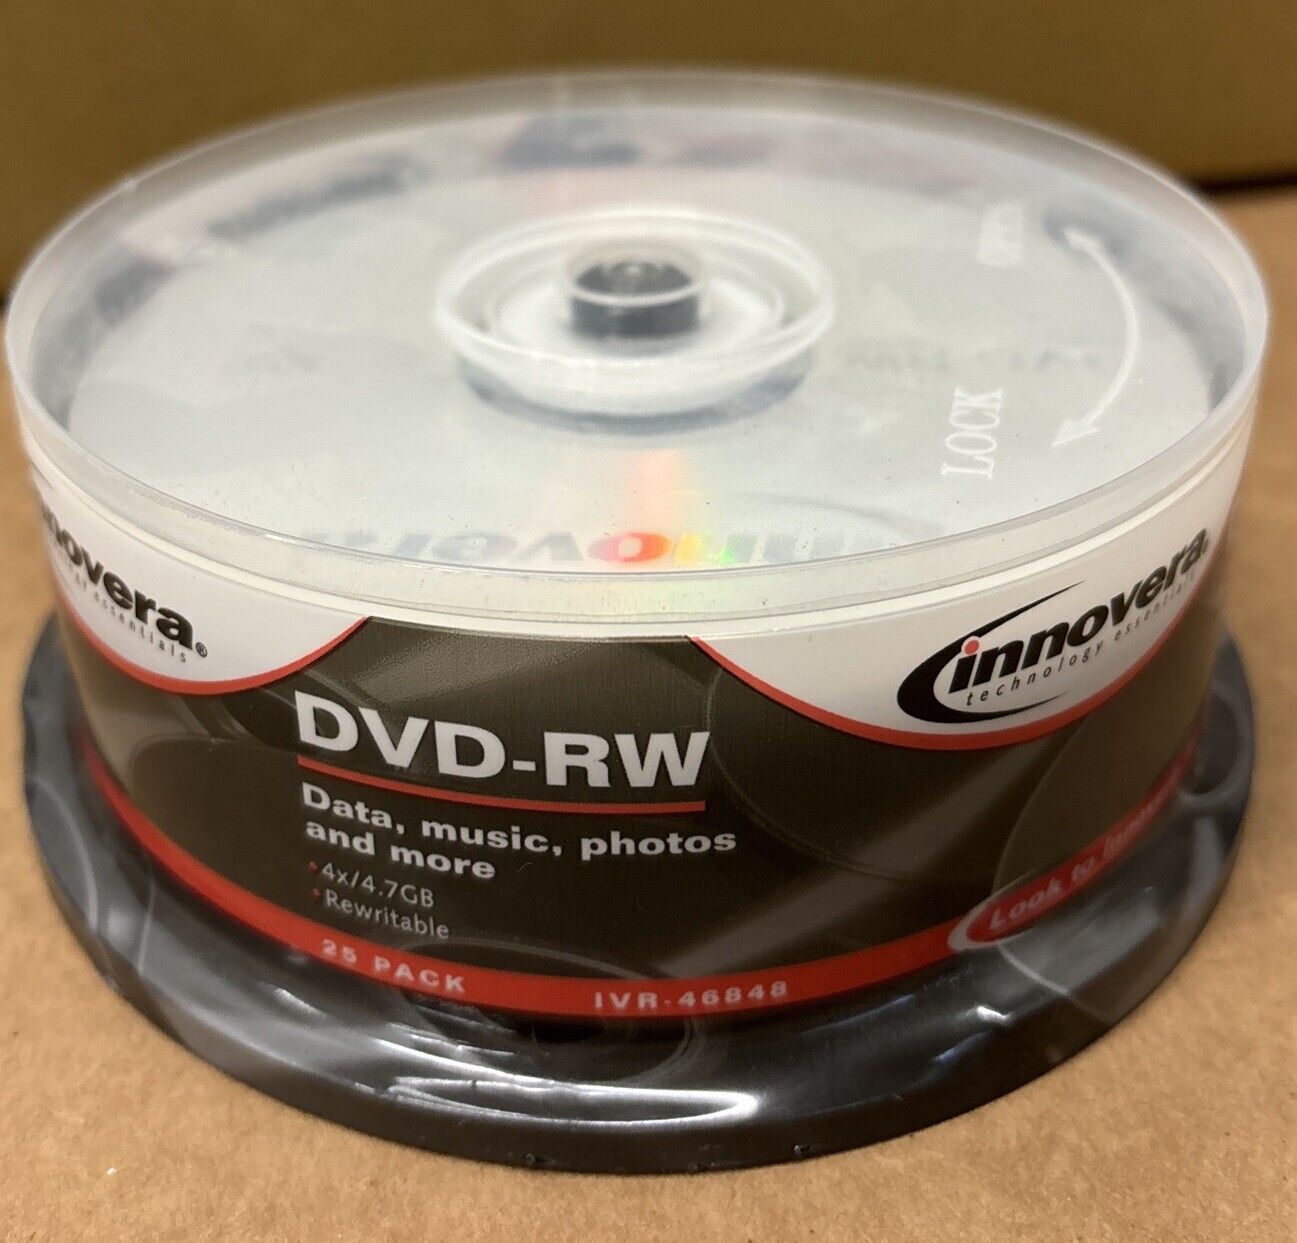 DVD-RW Discs Innovera Technologies 4.7GB 4x Spindle Silver 25/Pack IVR-46848 NEW